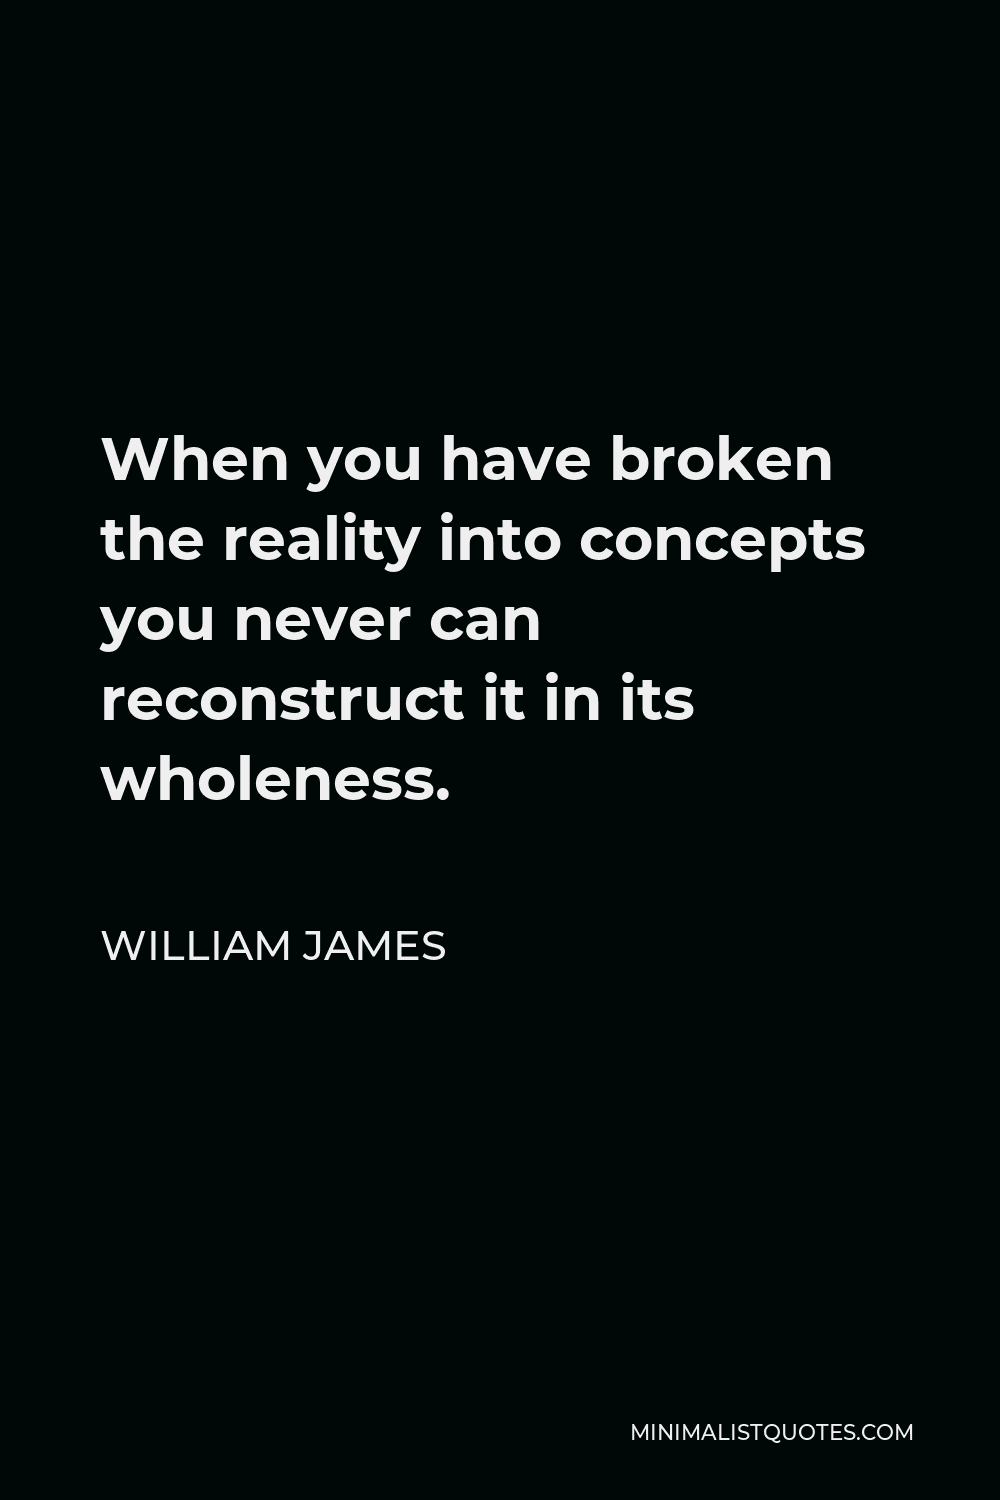 William James Quote - When you have broken the reality into concepts you never can reconstruct it in its wholeness.